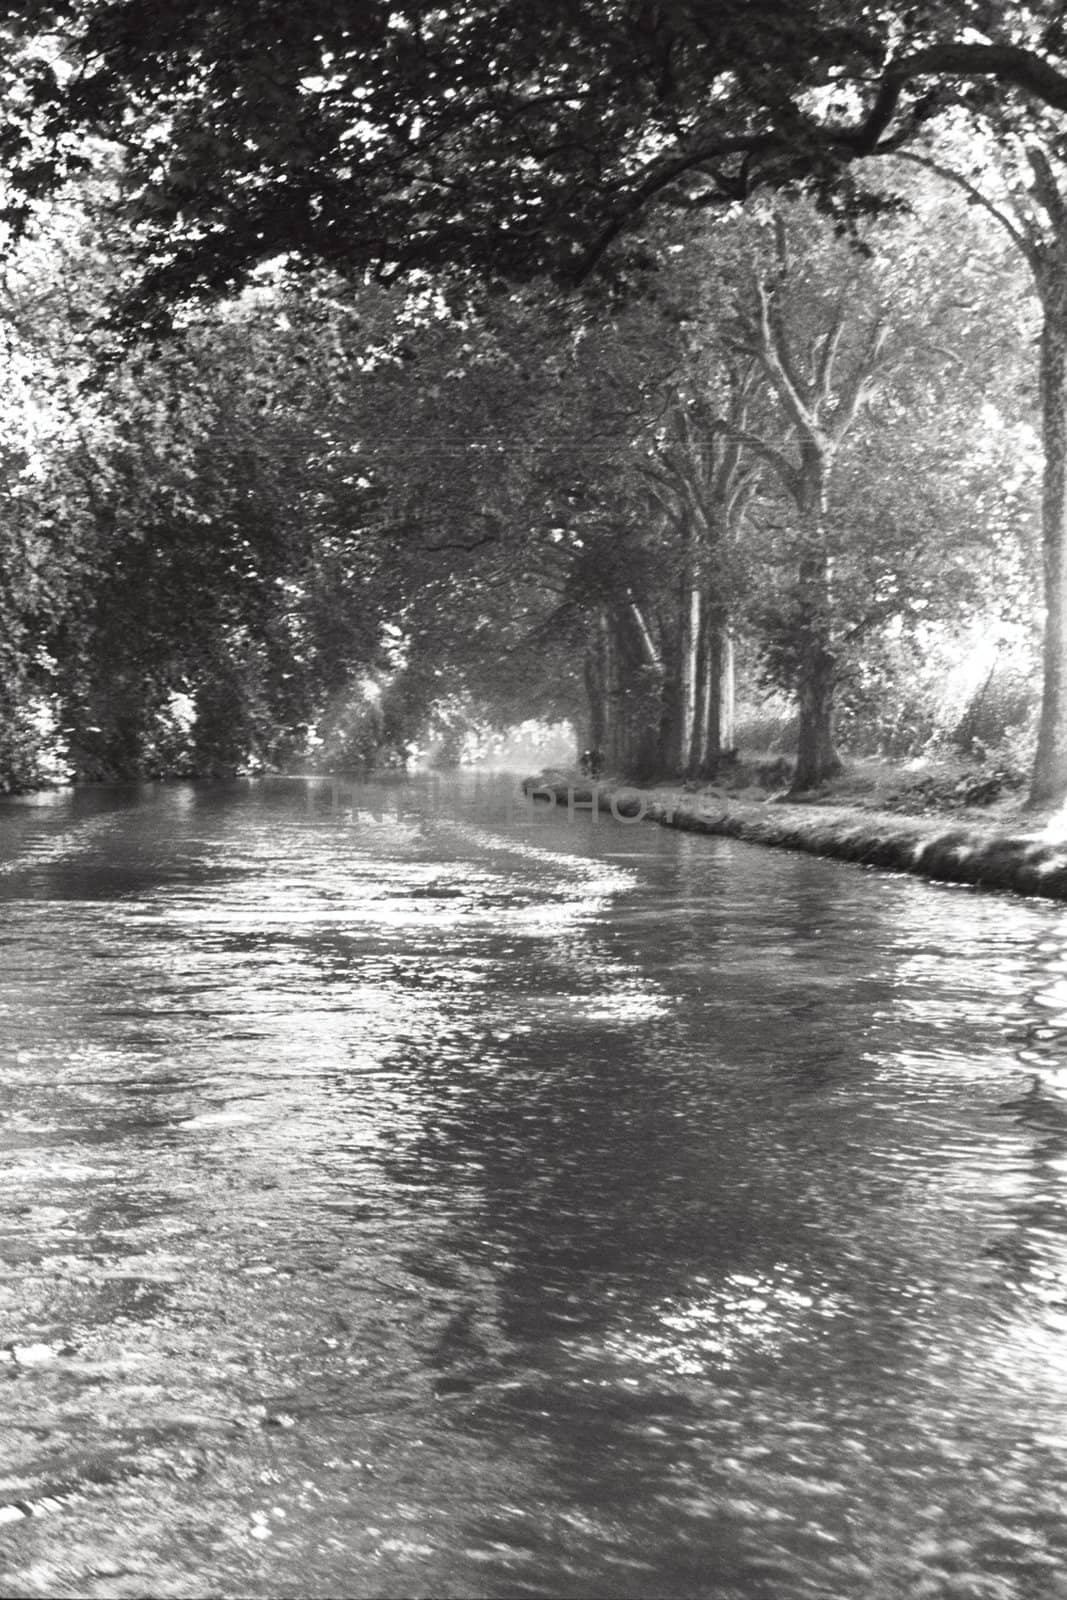 b/w image of Canal du Midi in southern France, Europe, taken from middle of canal.